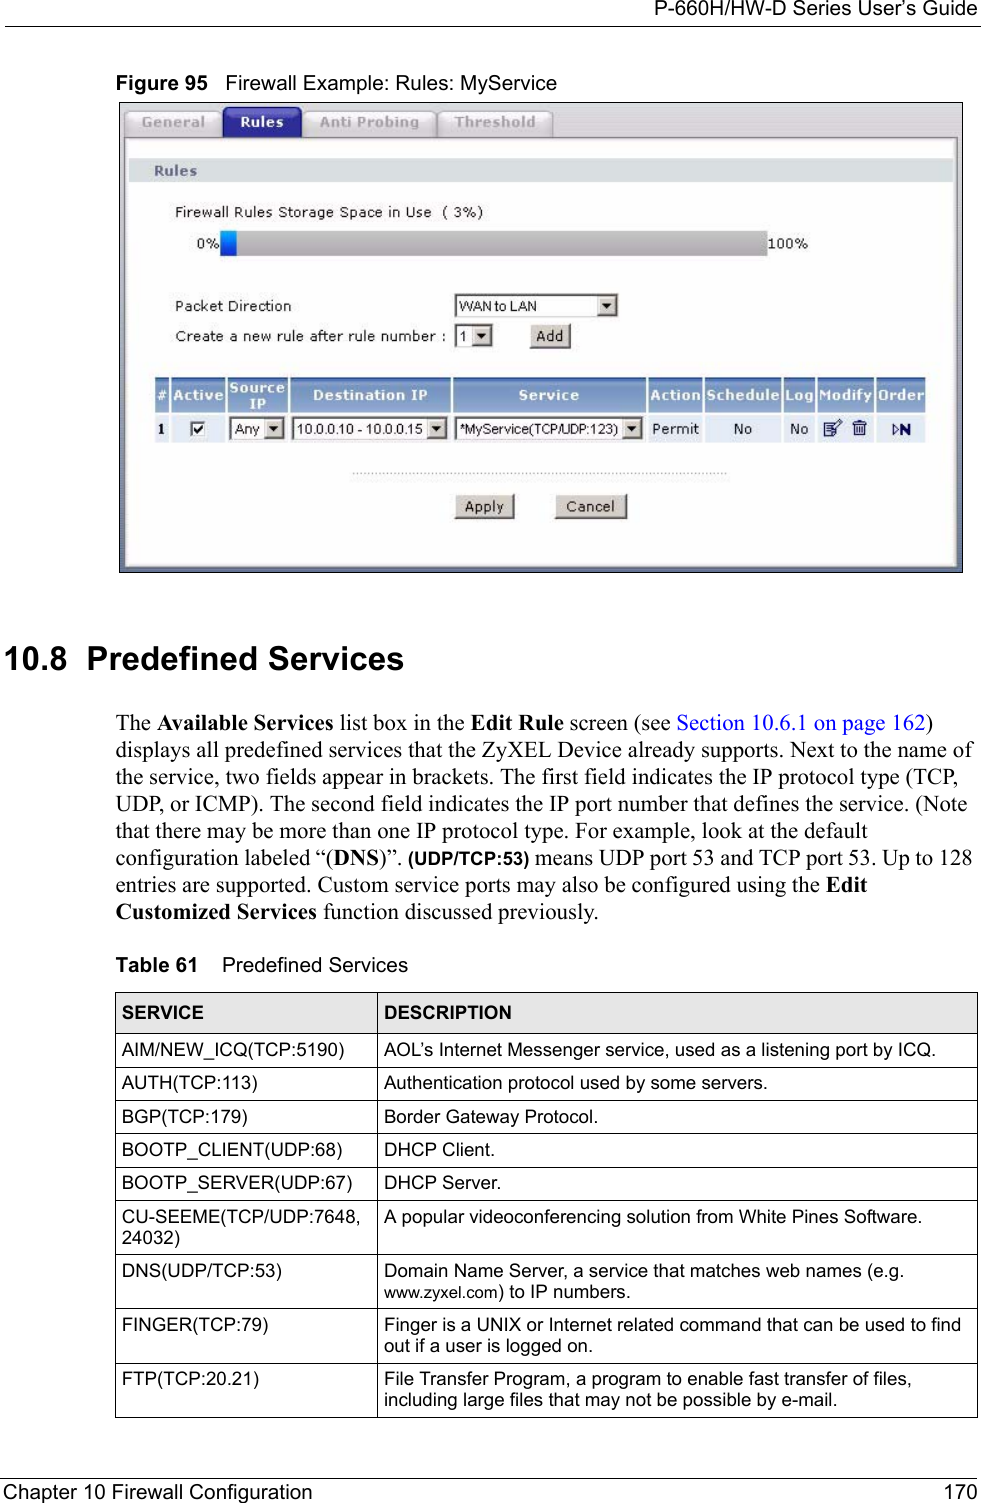 P-660H/HW-D Series User’s GuideChapter 10 Firewall Configuration 170Figure 95   Firewall Example: Rules: MyService 10.8  Predefined ServicesThe Available Services list box in the Edit Rule screen (see Section 10.6.1 on page 162) displays all predefined services that the ZyXEL Device already supports. Next to the name of the service, two fields appear in brackets. The first field indicates the IP protocol type (TCP, UDP, or ICMP). The second field indicates the IP port number that defines the service. (Note that there may be more than one IP protocol type. For example, look at the default configuration labeled “(DNS)”. (UDP/TCP:53) means UDP port 53 and TCP port 53. Up to 128 entries are supported. Custom service ports may also be configured using the Edit Customized Services function discussed previously.Table 61    Predefined ServicesSERVICE DESCRIPTIONAIM/NEW_ICQ(TCP:5190) AOL’s Internet Messenger service, used as a listening port by ICQ.AUTH(TCP:113) Authentication protocol used by some servers.BGP(TCP:179)  Border Gateway Protocol.BOOTP_CLIENT(UDP:68)  DHCP Client.BOOTP_SERVER(UDP:67)  DHCP Server.CU-SEEME(TCP/UDP:7648, 24032) A popular videoconferencing solution from White Pines Software.DNS(UDP/TCP:53)  Domain Name Server, a service that matches web names (e.g. www.zyxel.com) to IP numbers.FINGER(TCP:79)  Finger is a UNIX or Internet related command that can be used to find out if a user is logged on.FTP(TCP:20.21)  File Transfer Program, a program to enable fast transfer of files, including large files that may not be possible by e-mail.